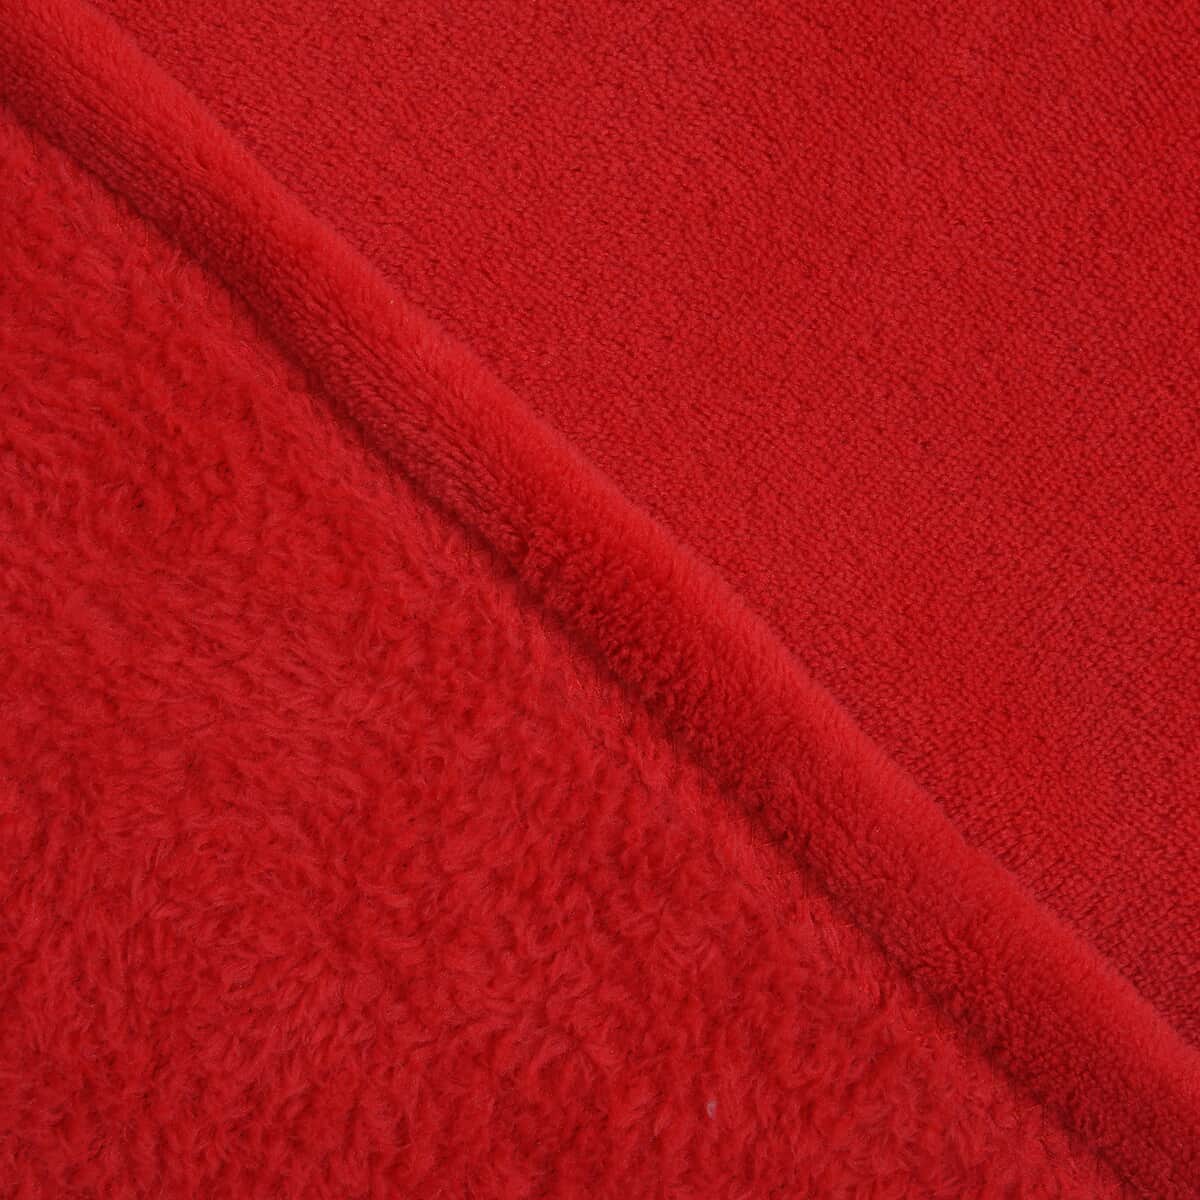 HOMESMART Toreador Solid Coral Fleece Warmth and Soft Blanket (50"x70") image number 2